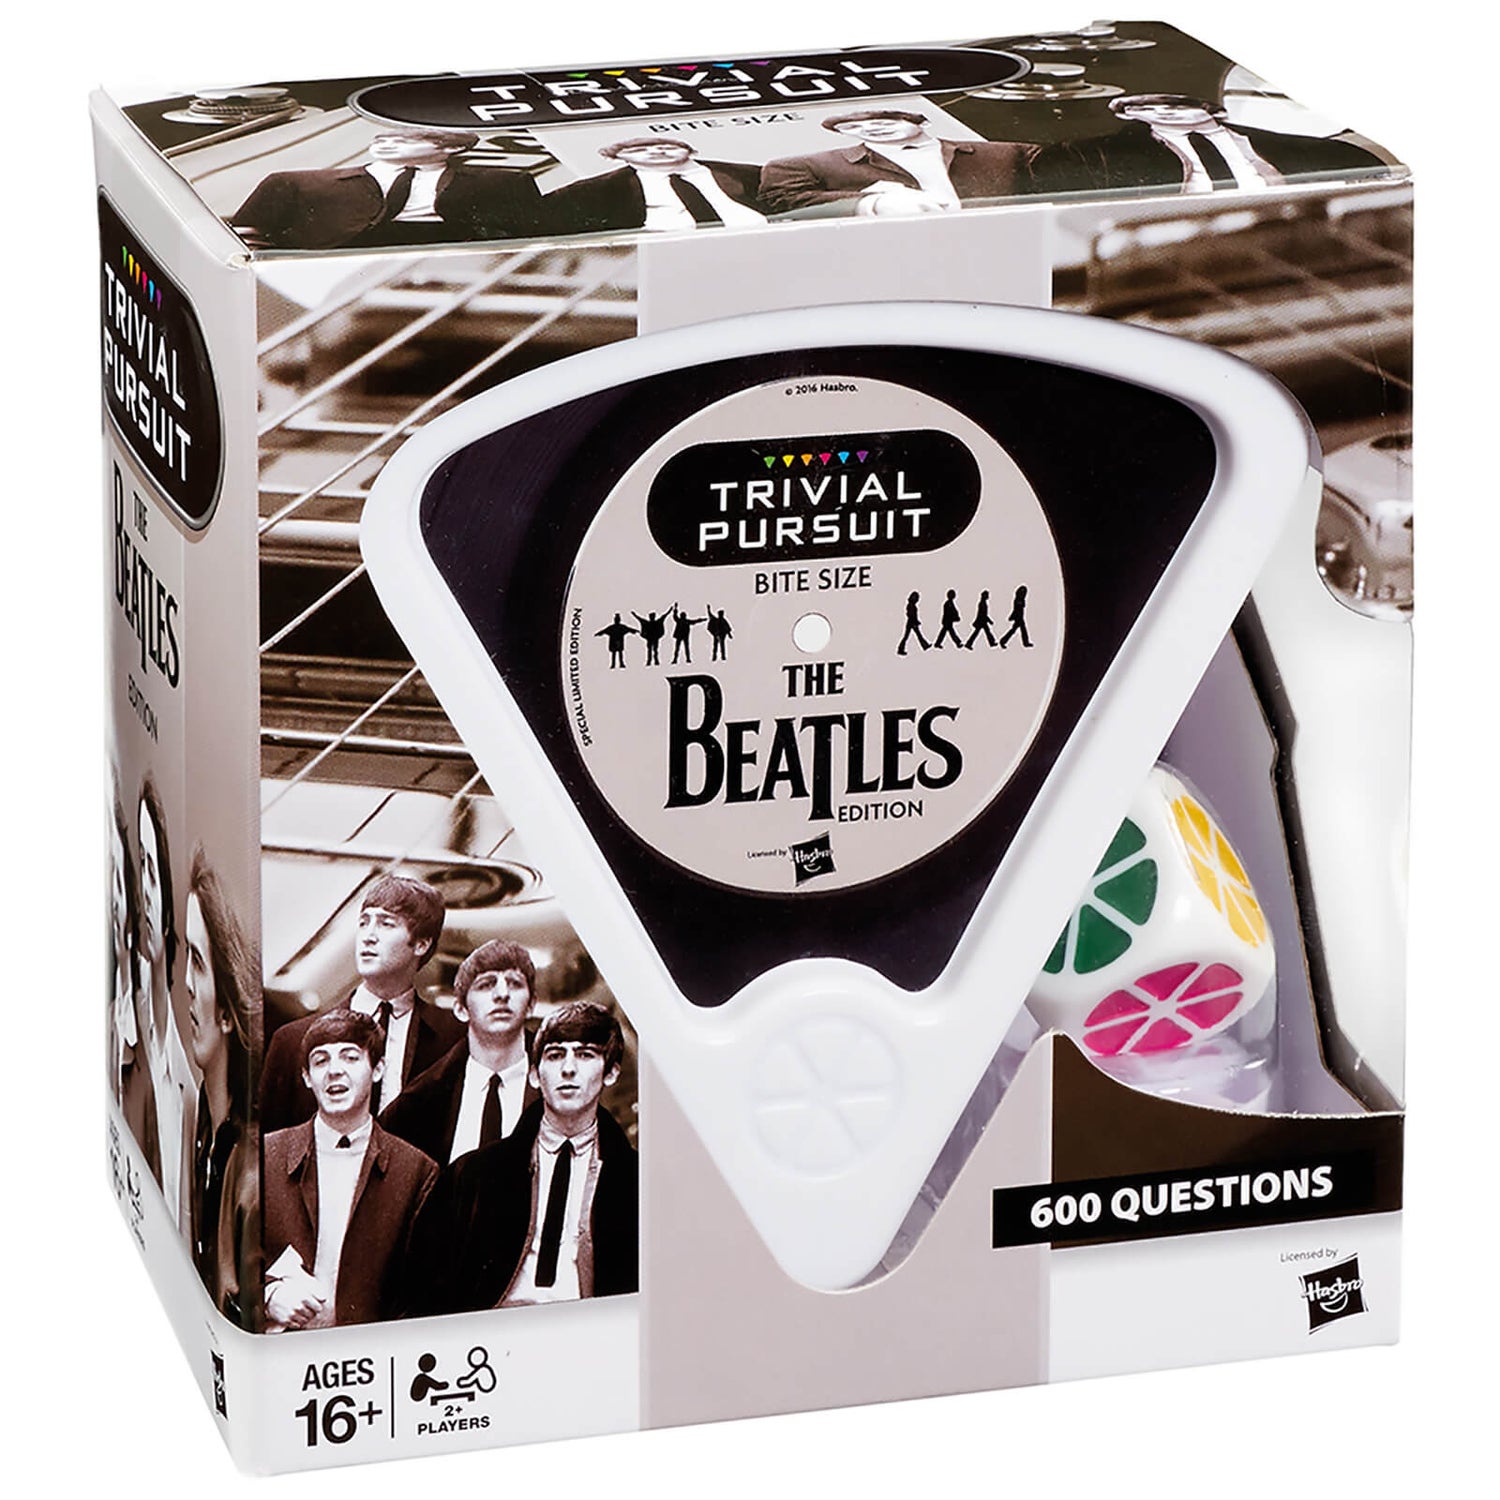 Trivial Pursuit Game - The Beatles Edition